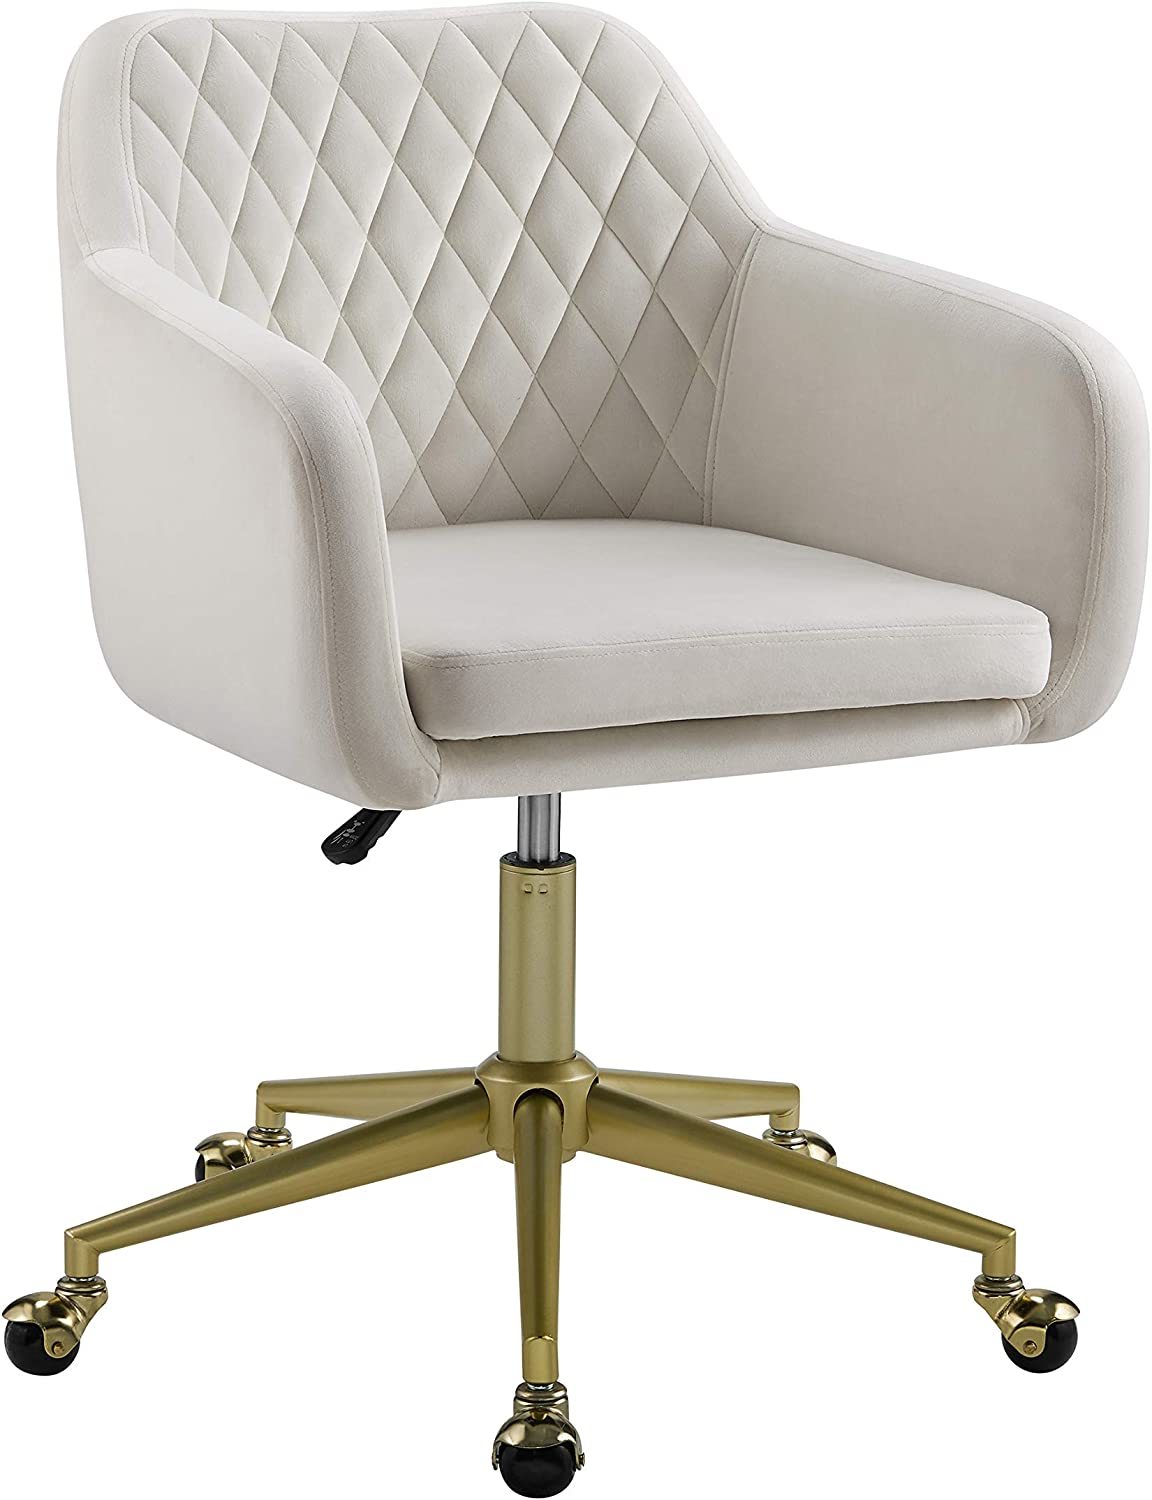 Brooklyn Office Chair In White With Quilting By Linon. - $241.99